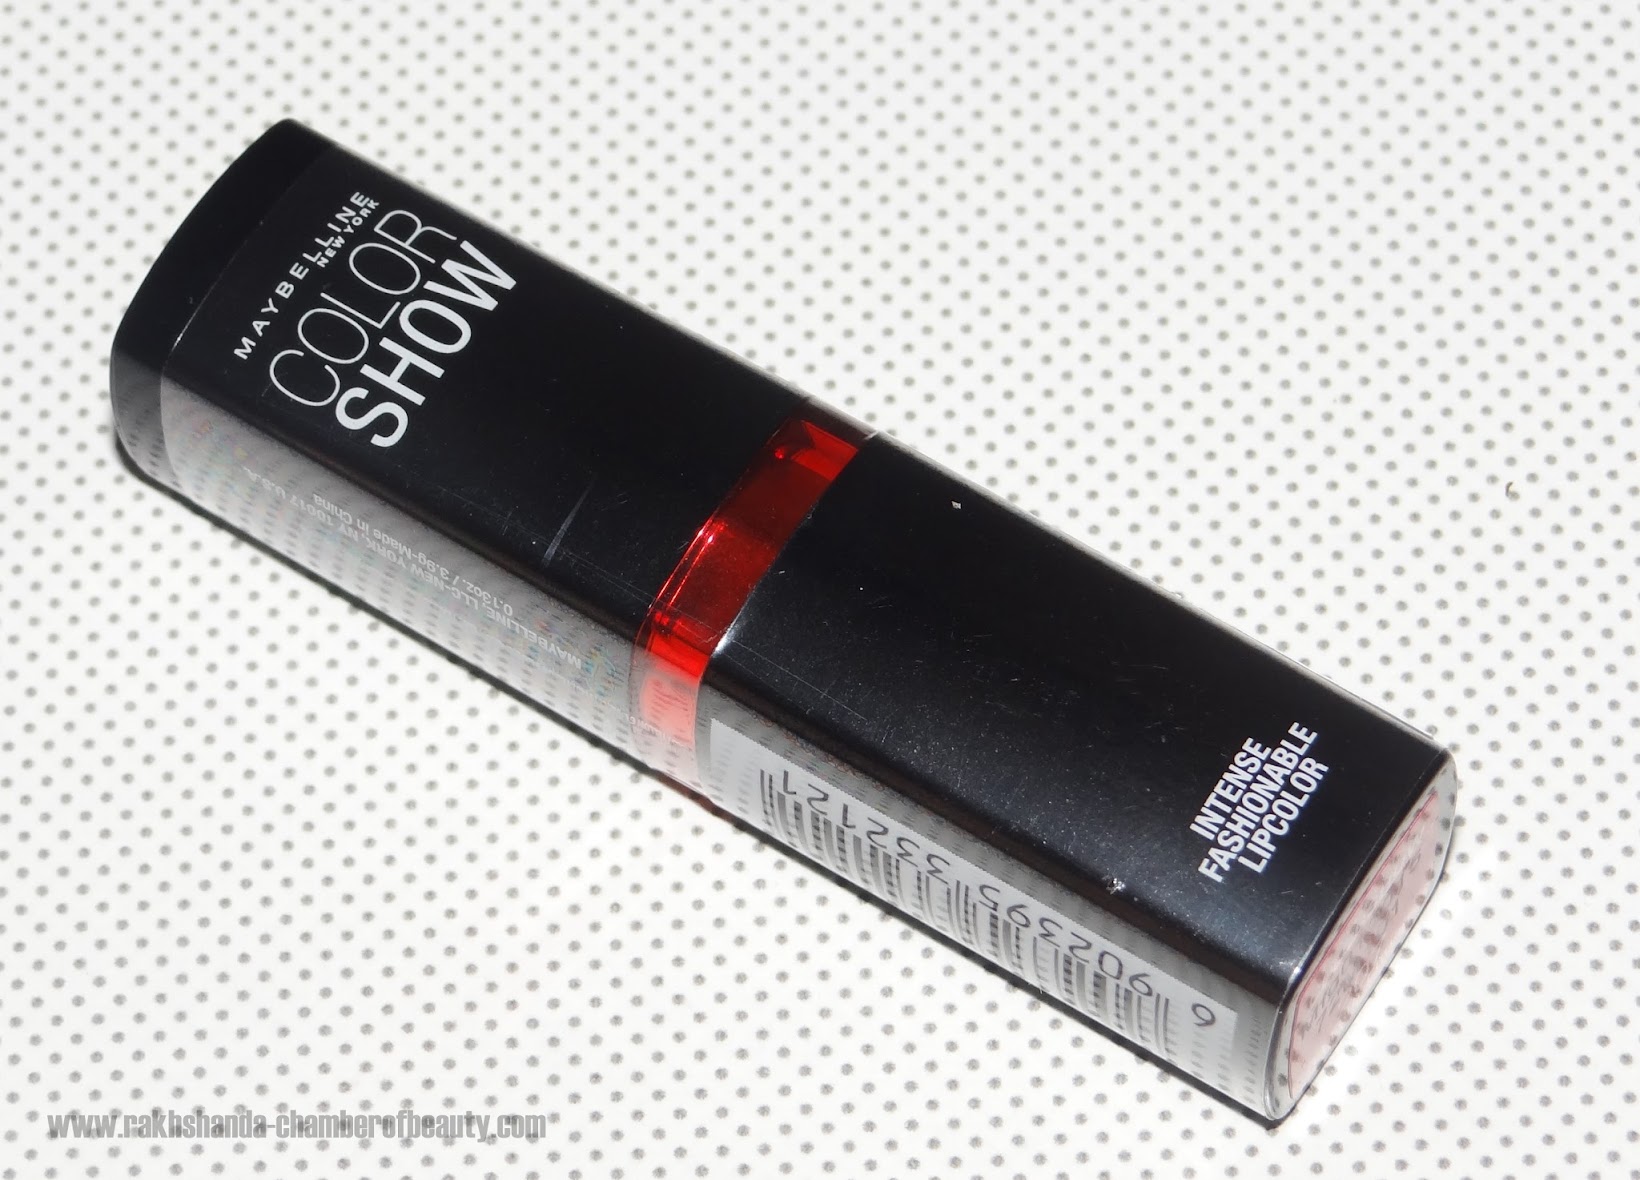 Maybelline Color Show lipstick in Cherry Crush-review, swatches